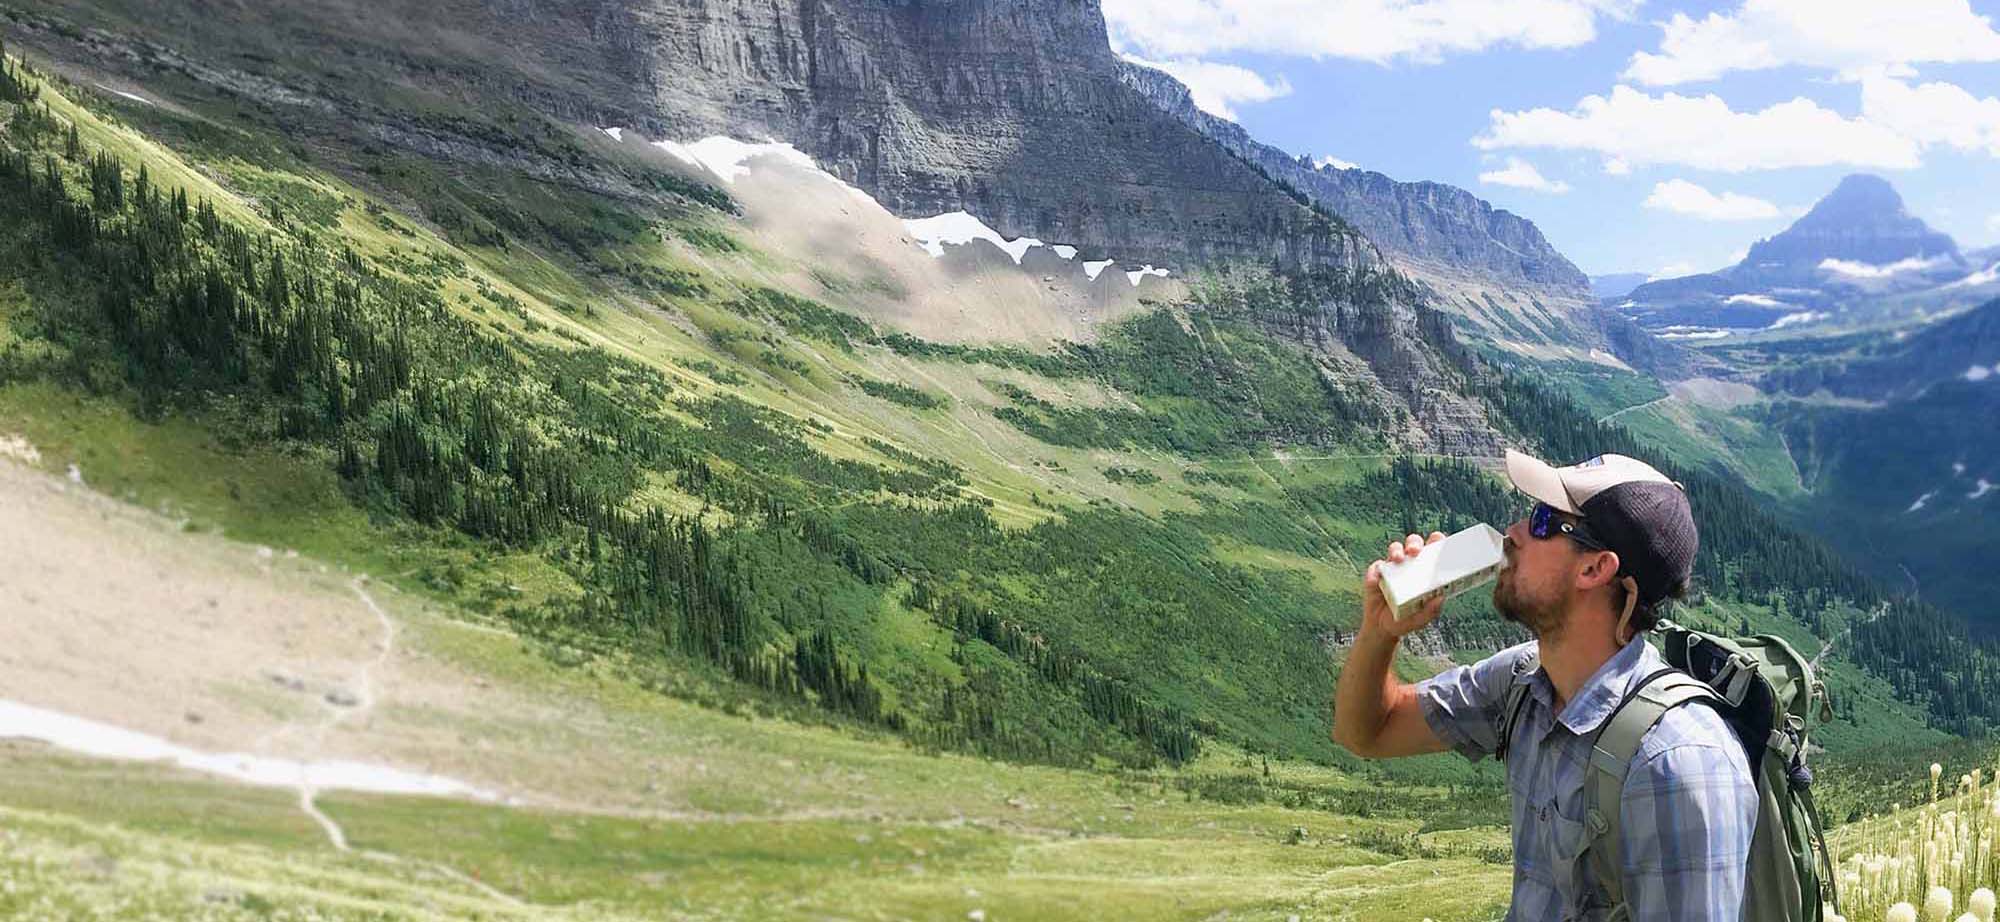 Hiker in the mountains drinks from tetrapack.